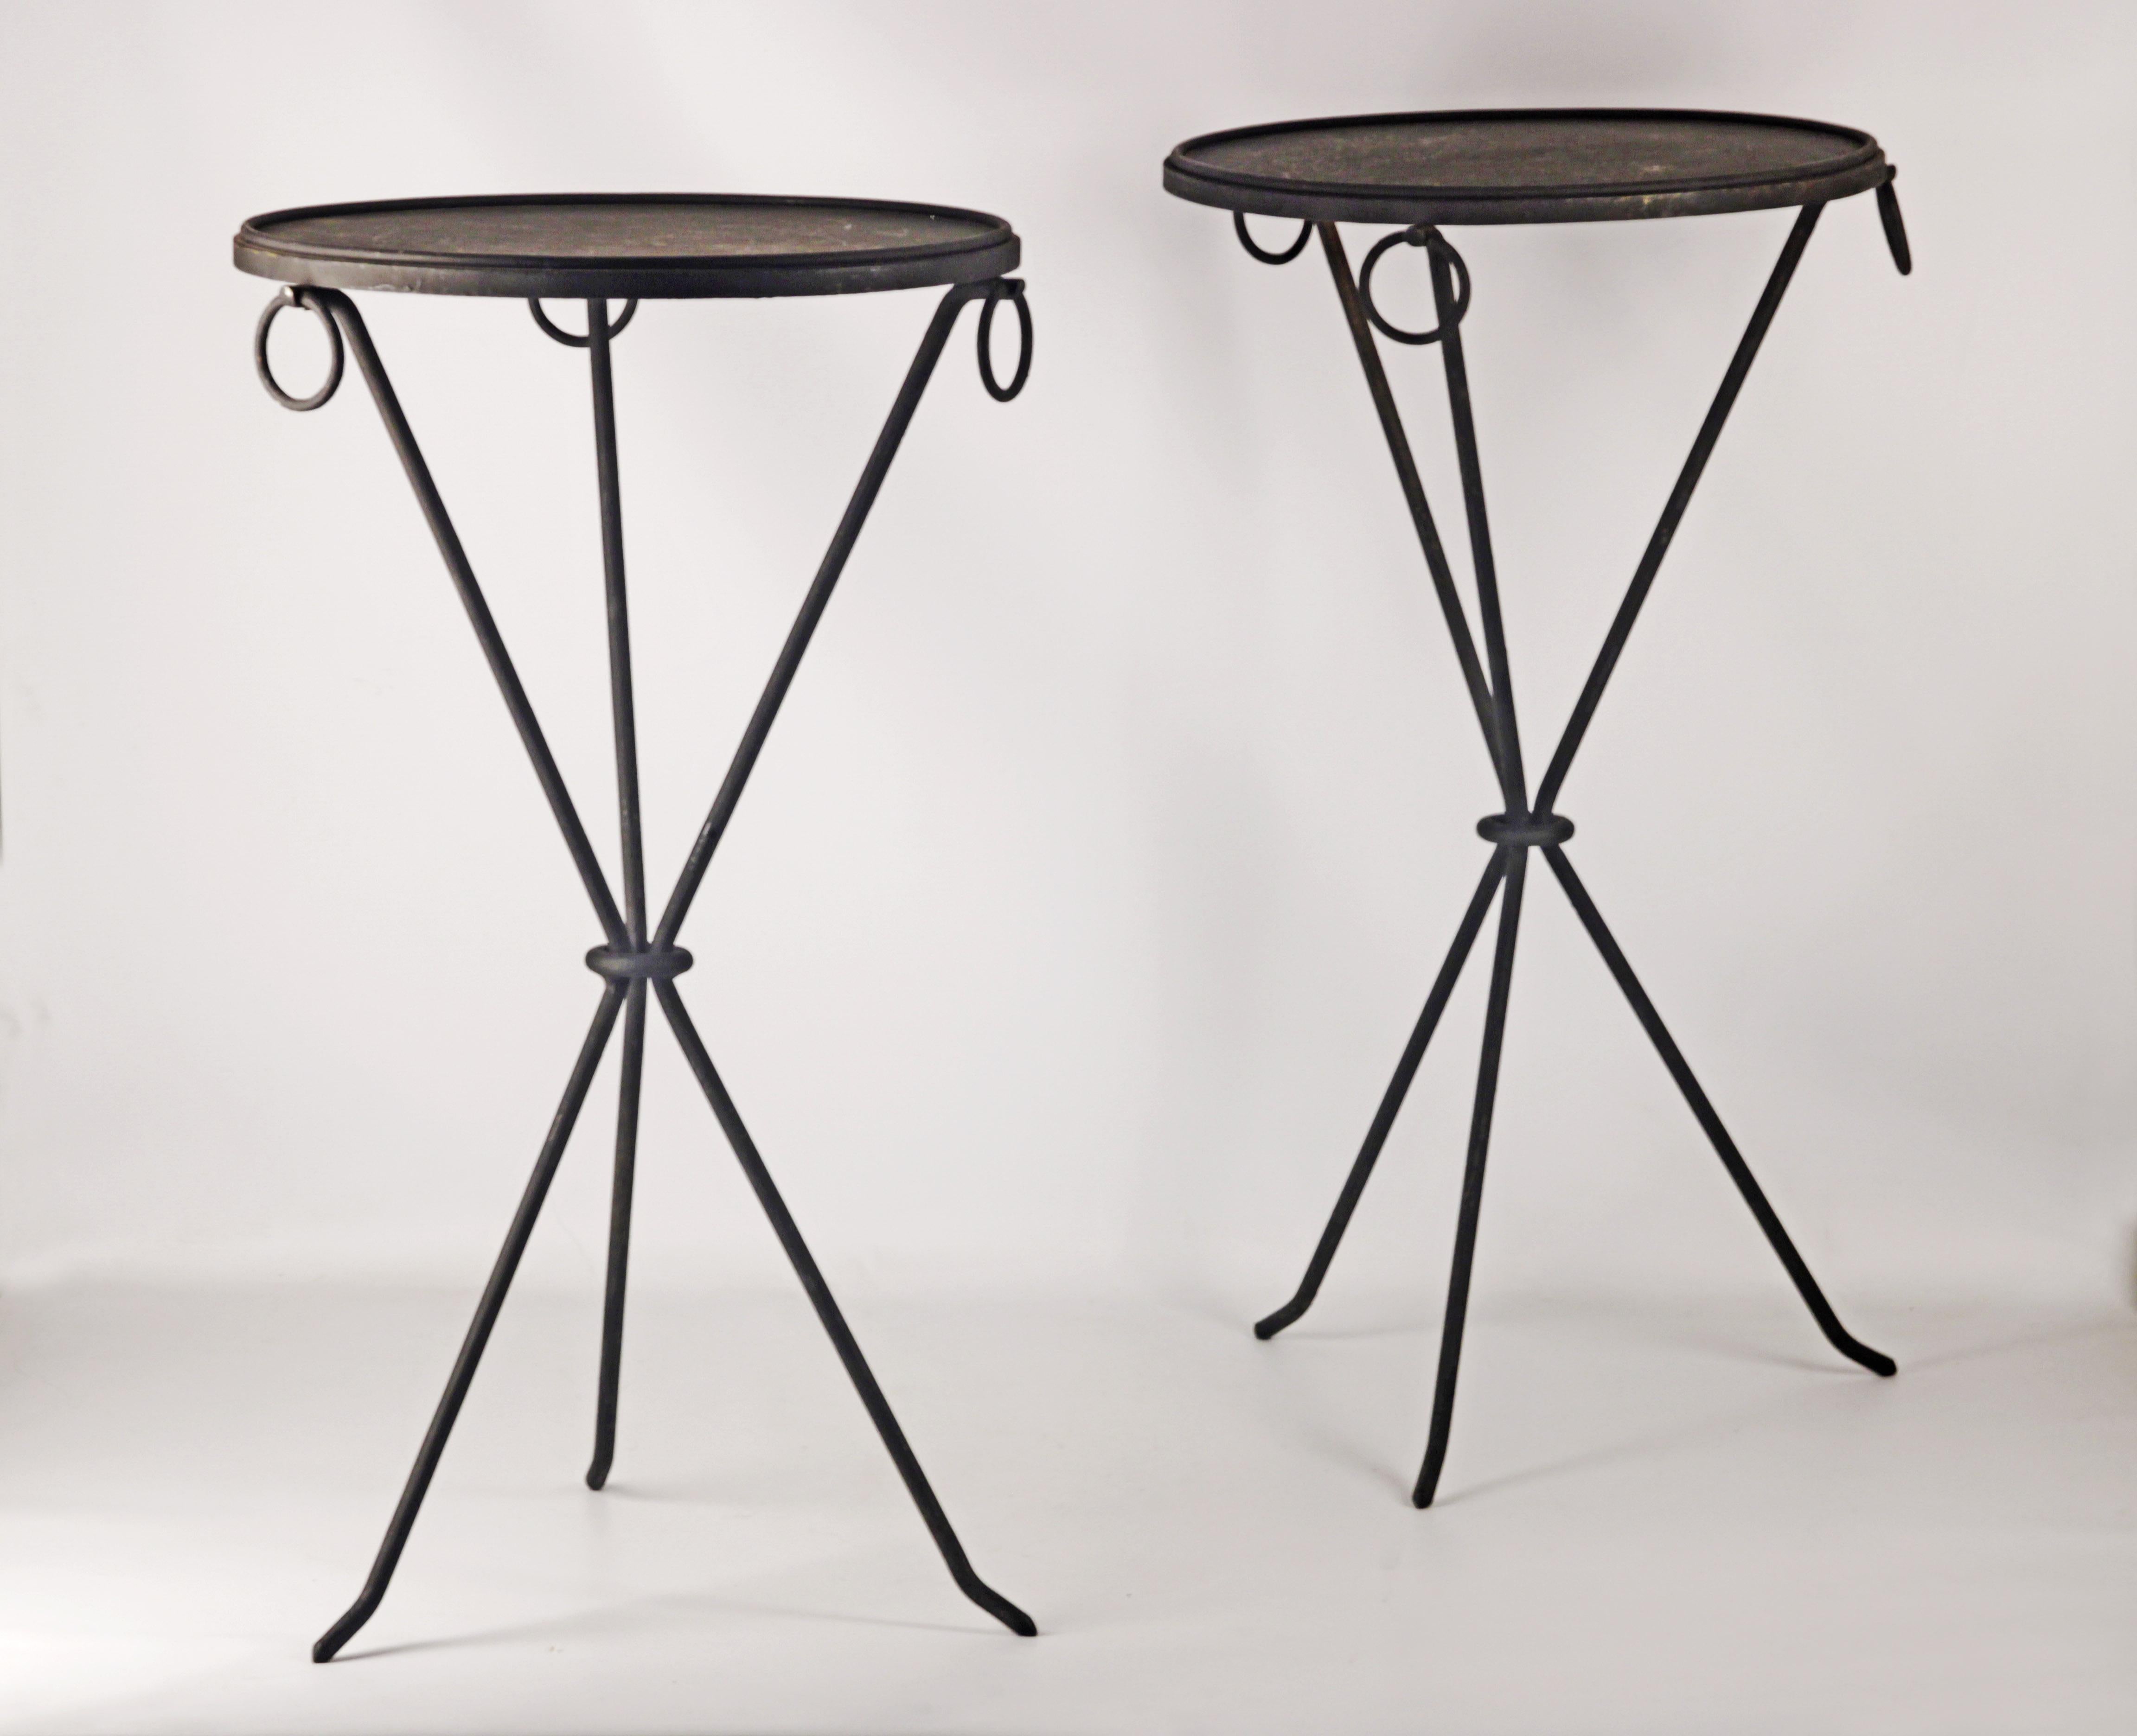 Pair of mid-20th century painted wrought iron guéridon tables by french decorator Jean Michel-Frank for argentine design house Comte, circa 1940.

One of the legendary designer’s most iconic designs, this pair of guéridons by Jean-Michel Frank